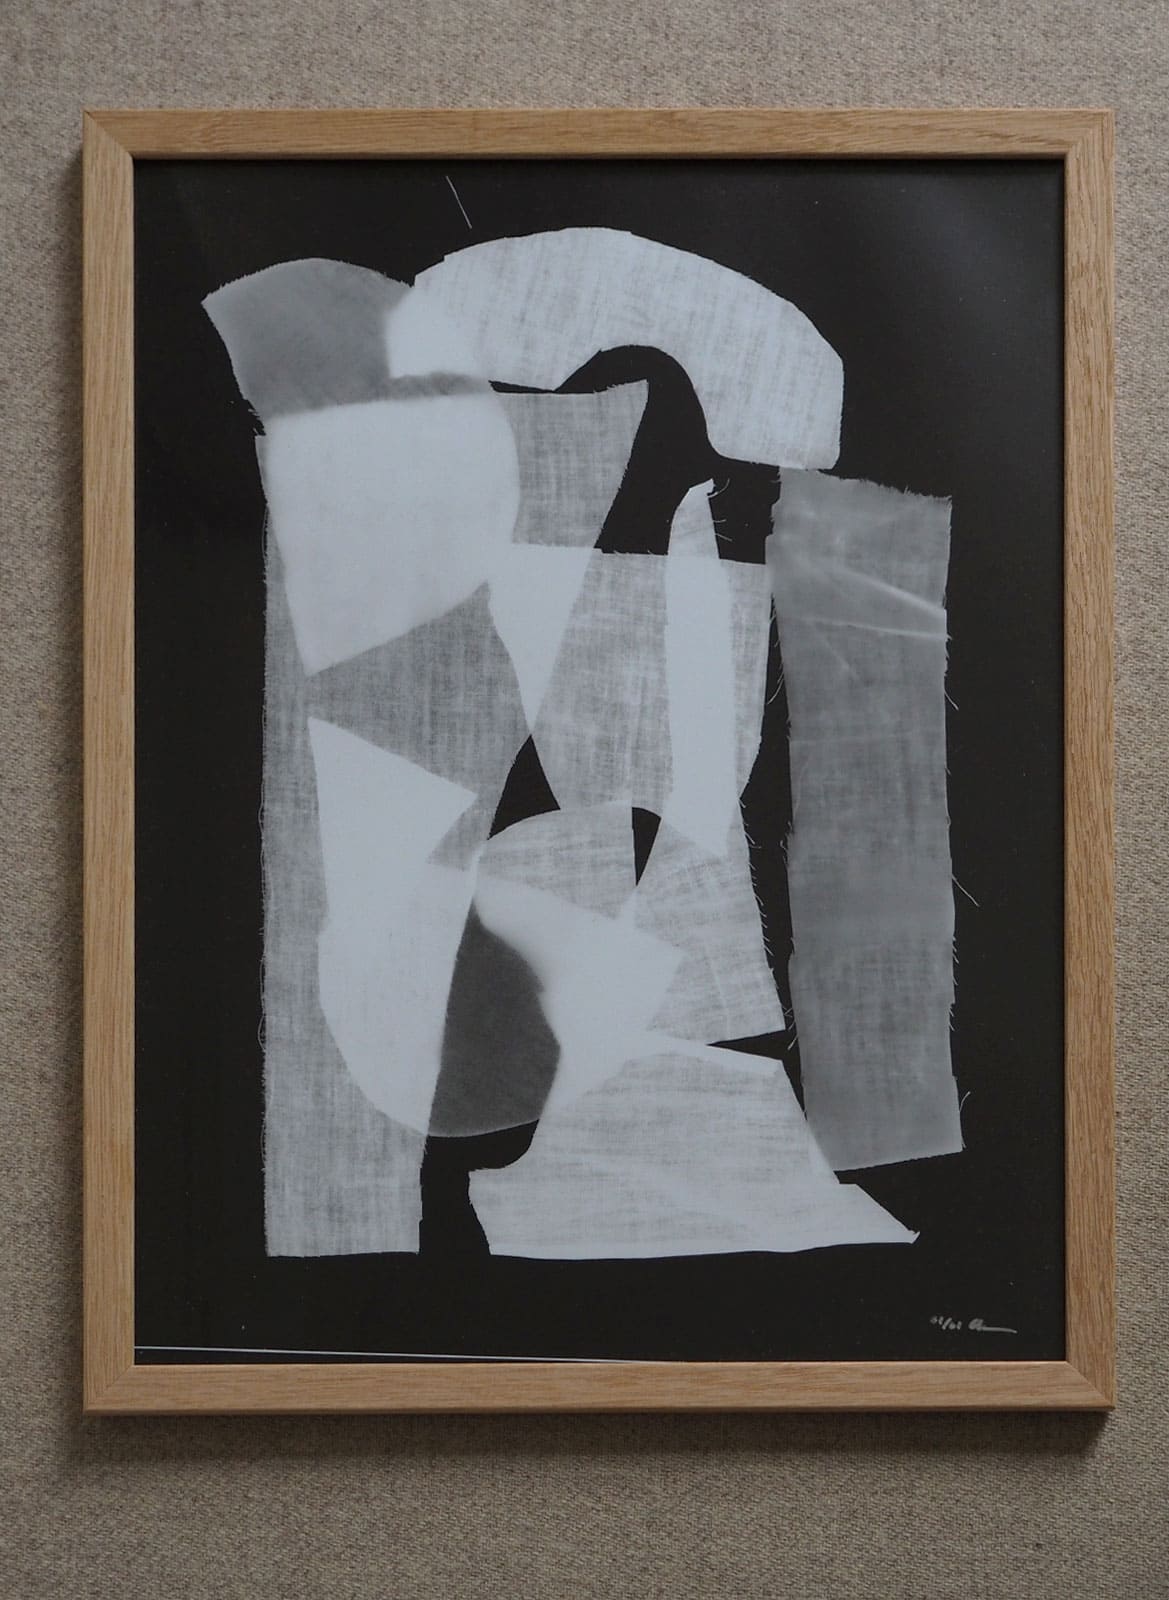 a black and white photogram showing an image of abstract shapes this is a limited edition by atelier cph